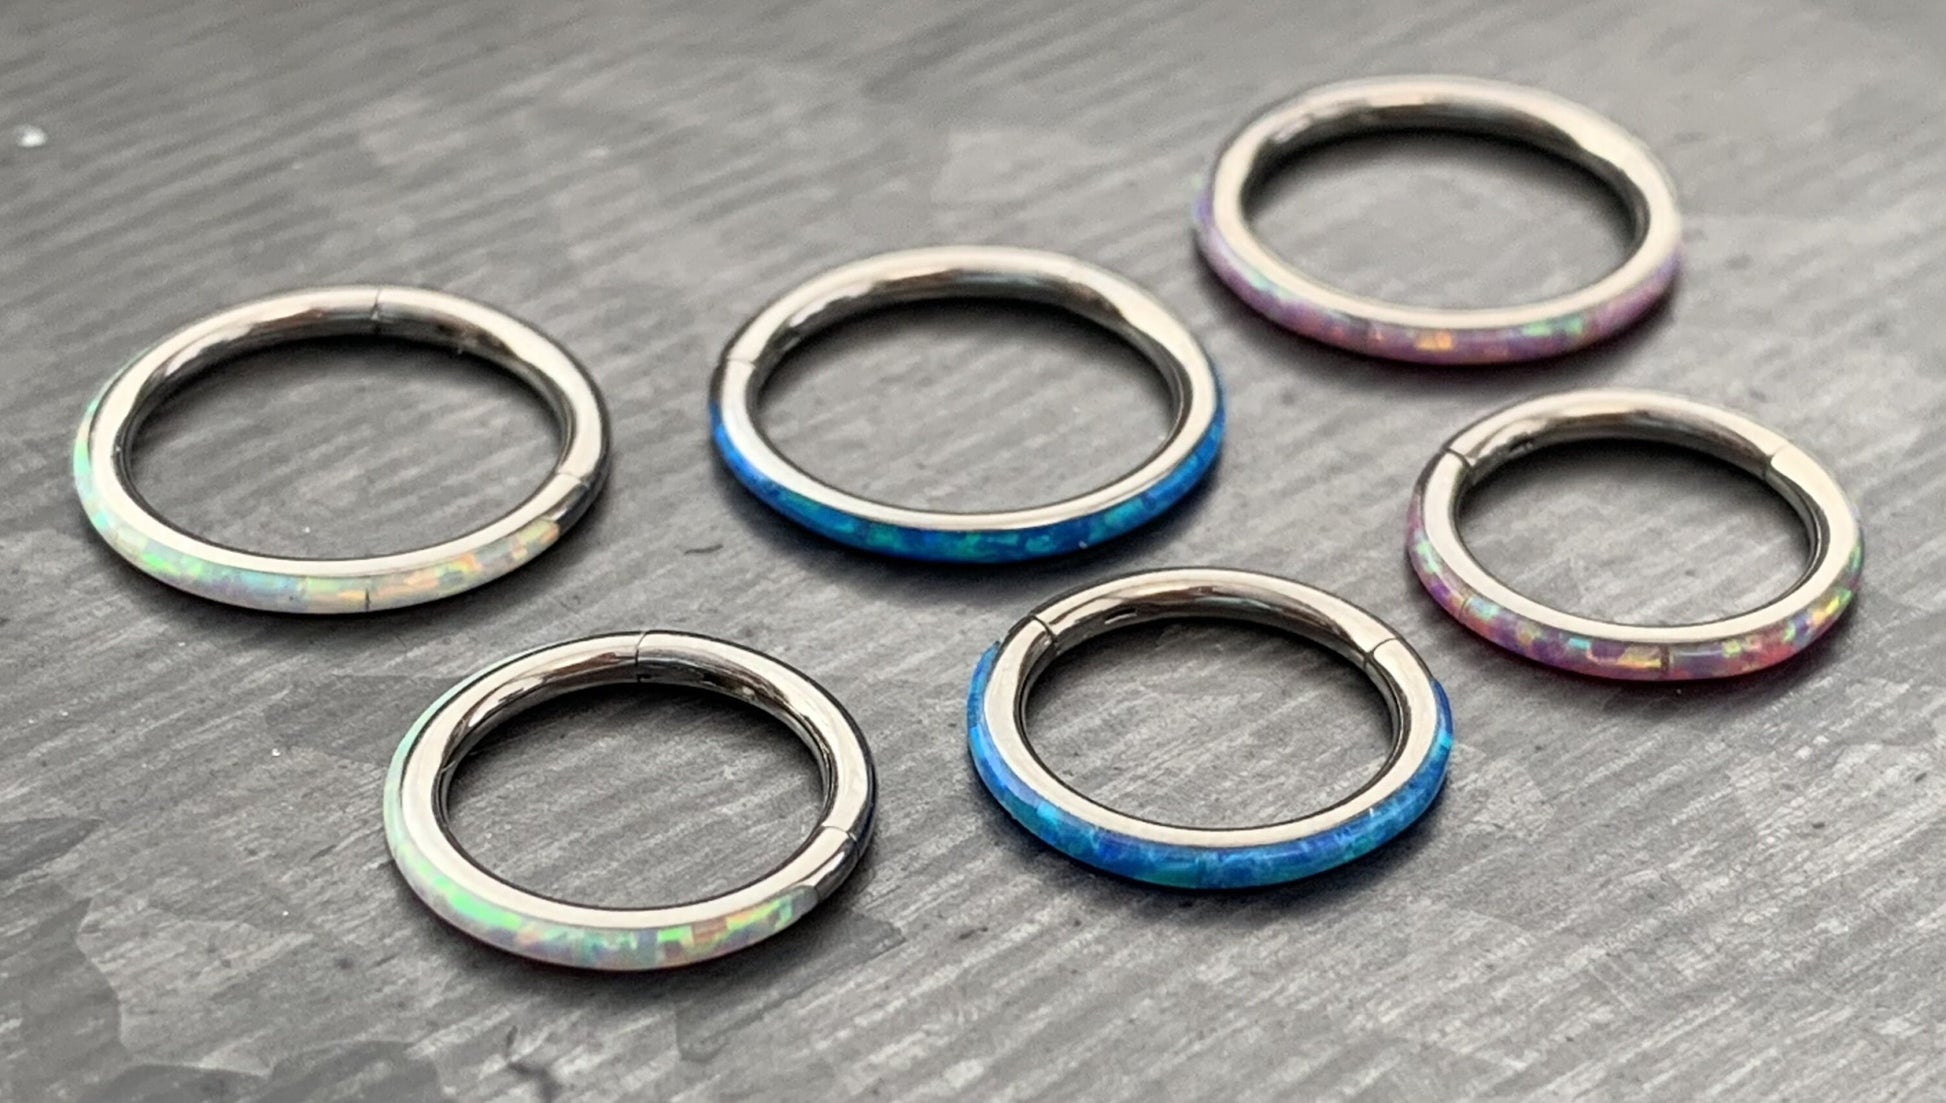 1 Piece Implant Grade Titanium Opal Outer Edge Hinged Segment Septum Ring - White, Pink, Blue - Gauge 16g, Diameter 10mm or 8mm available!